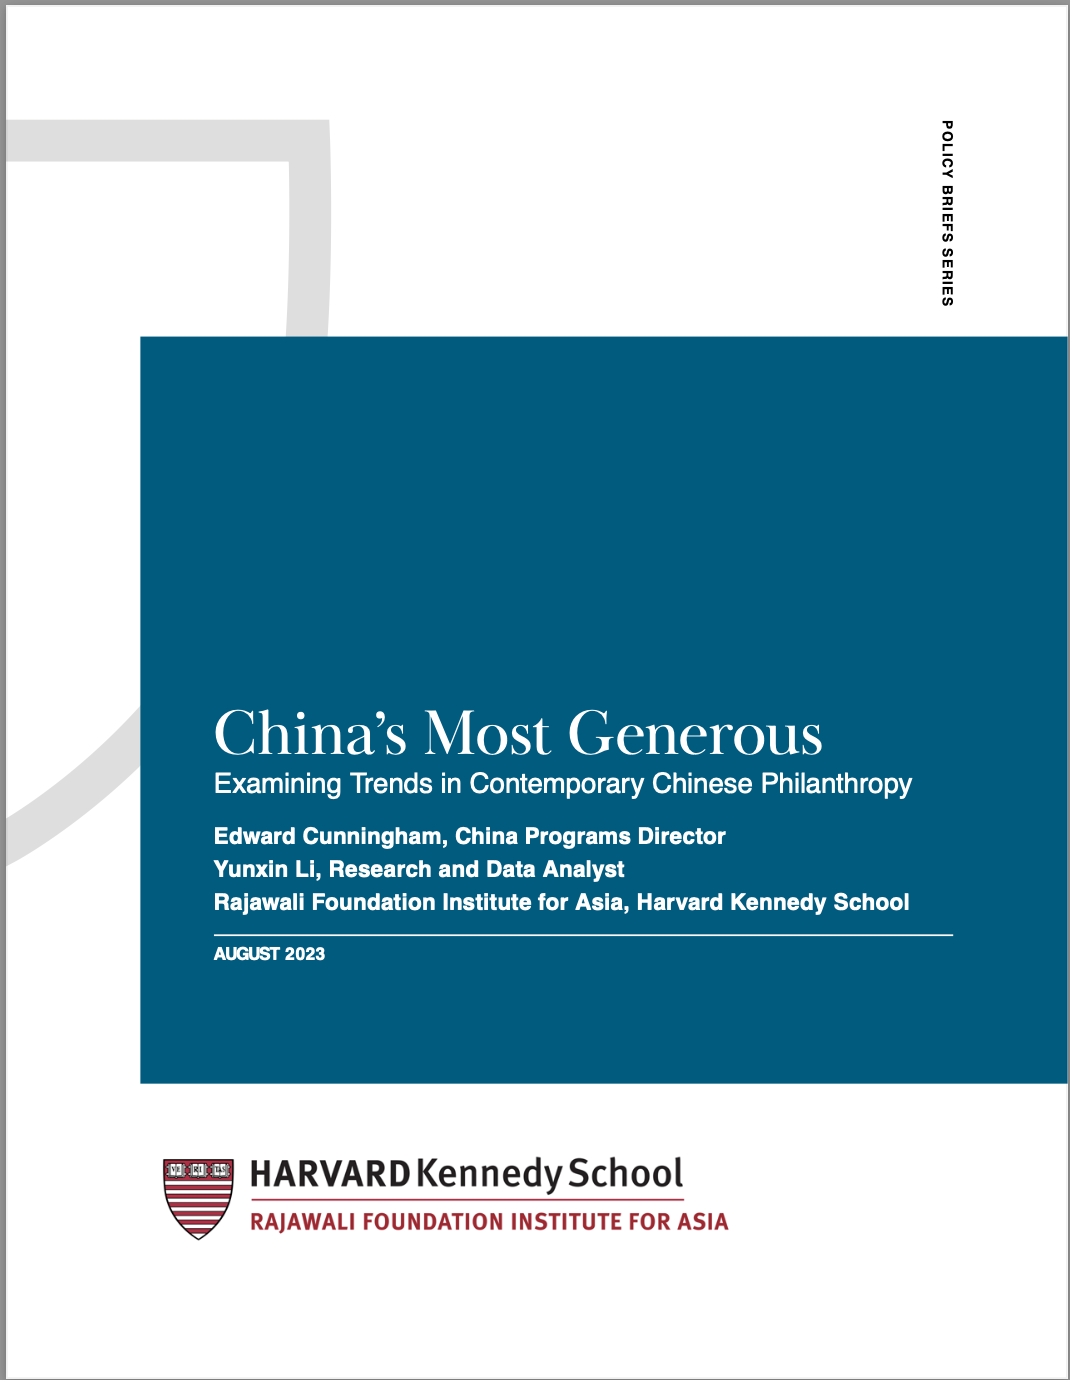 China’s Most Generous: Examining Trends in Contemporary Chinese Philanthropy (2020 Update)